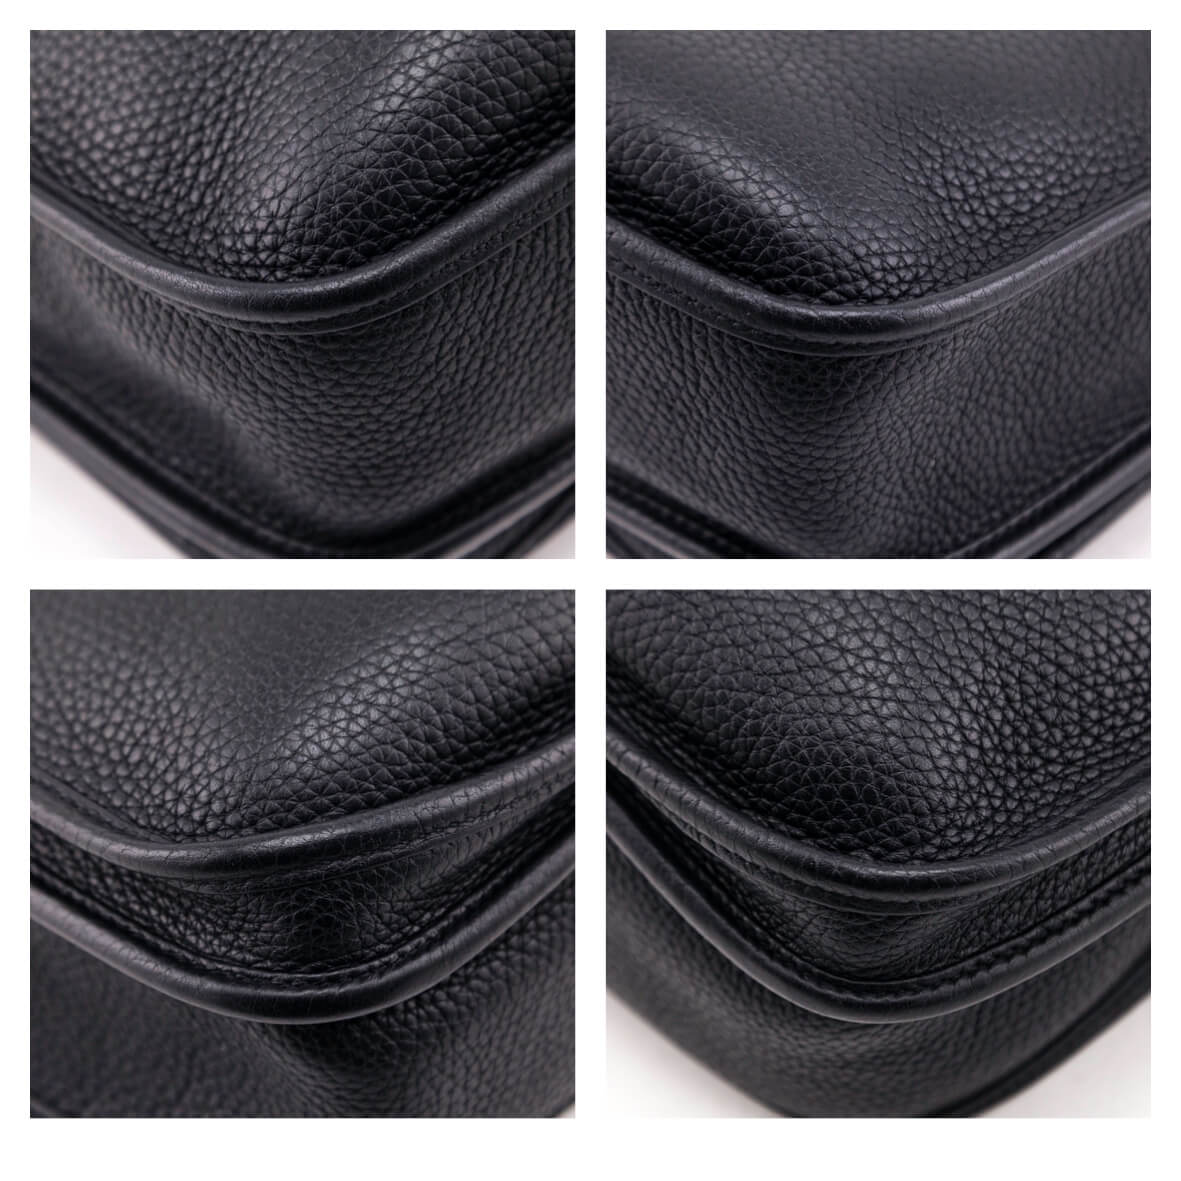 Hermes Black Clemence Evelyne III PM 29 - Love that Bag etc - Preowned Authentic Designer Handbags & Preloved Fashions